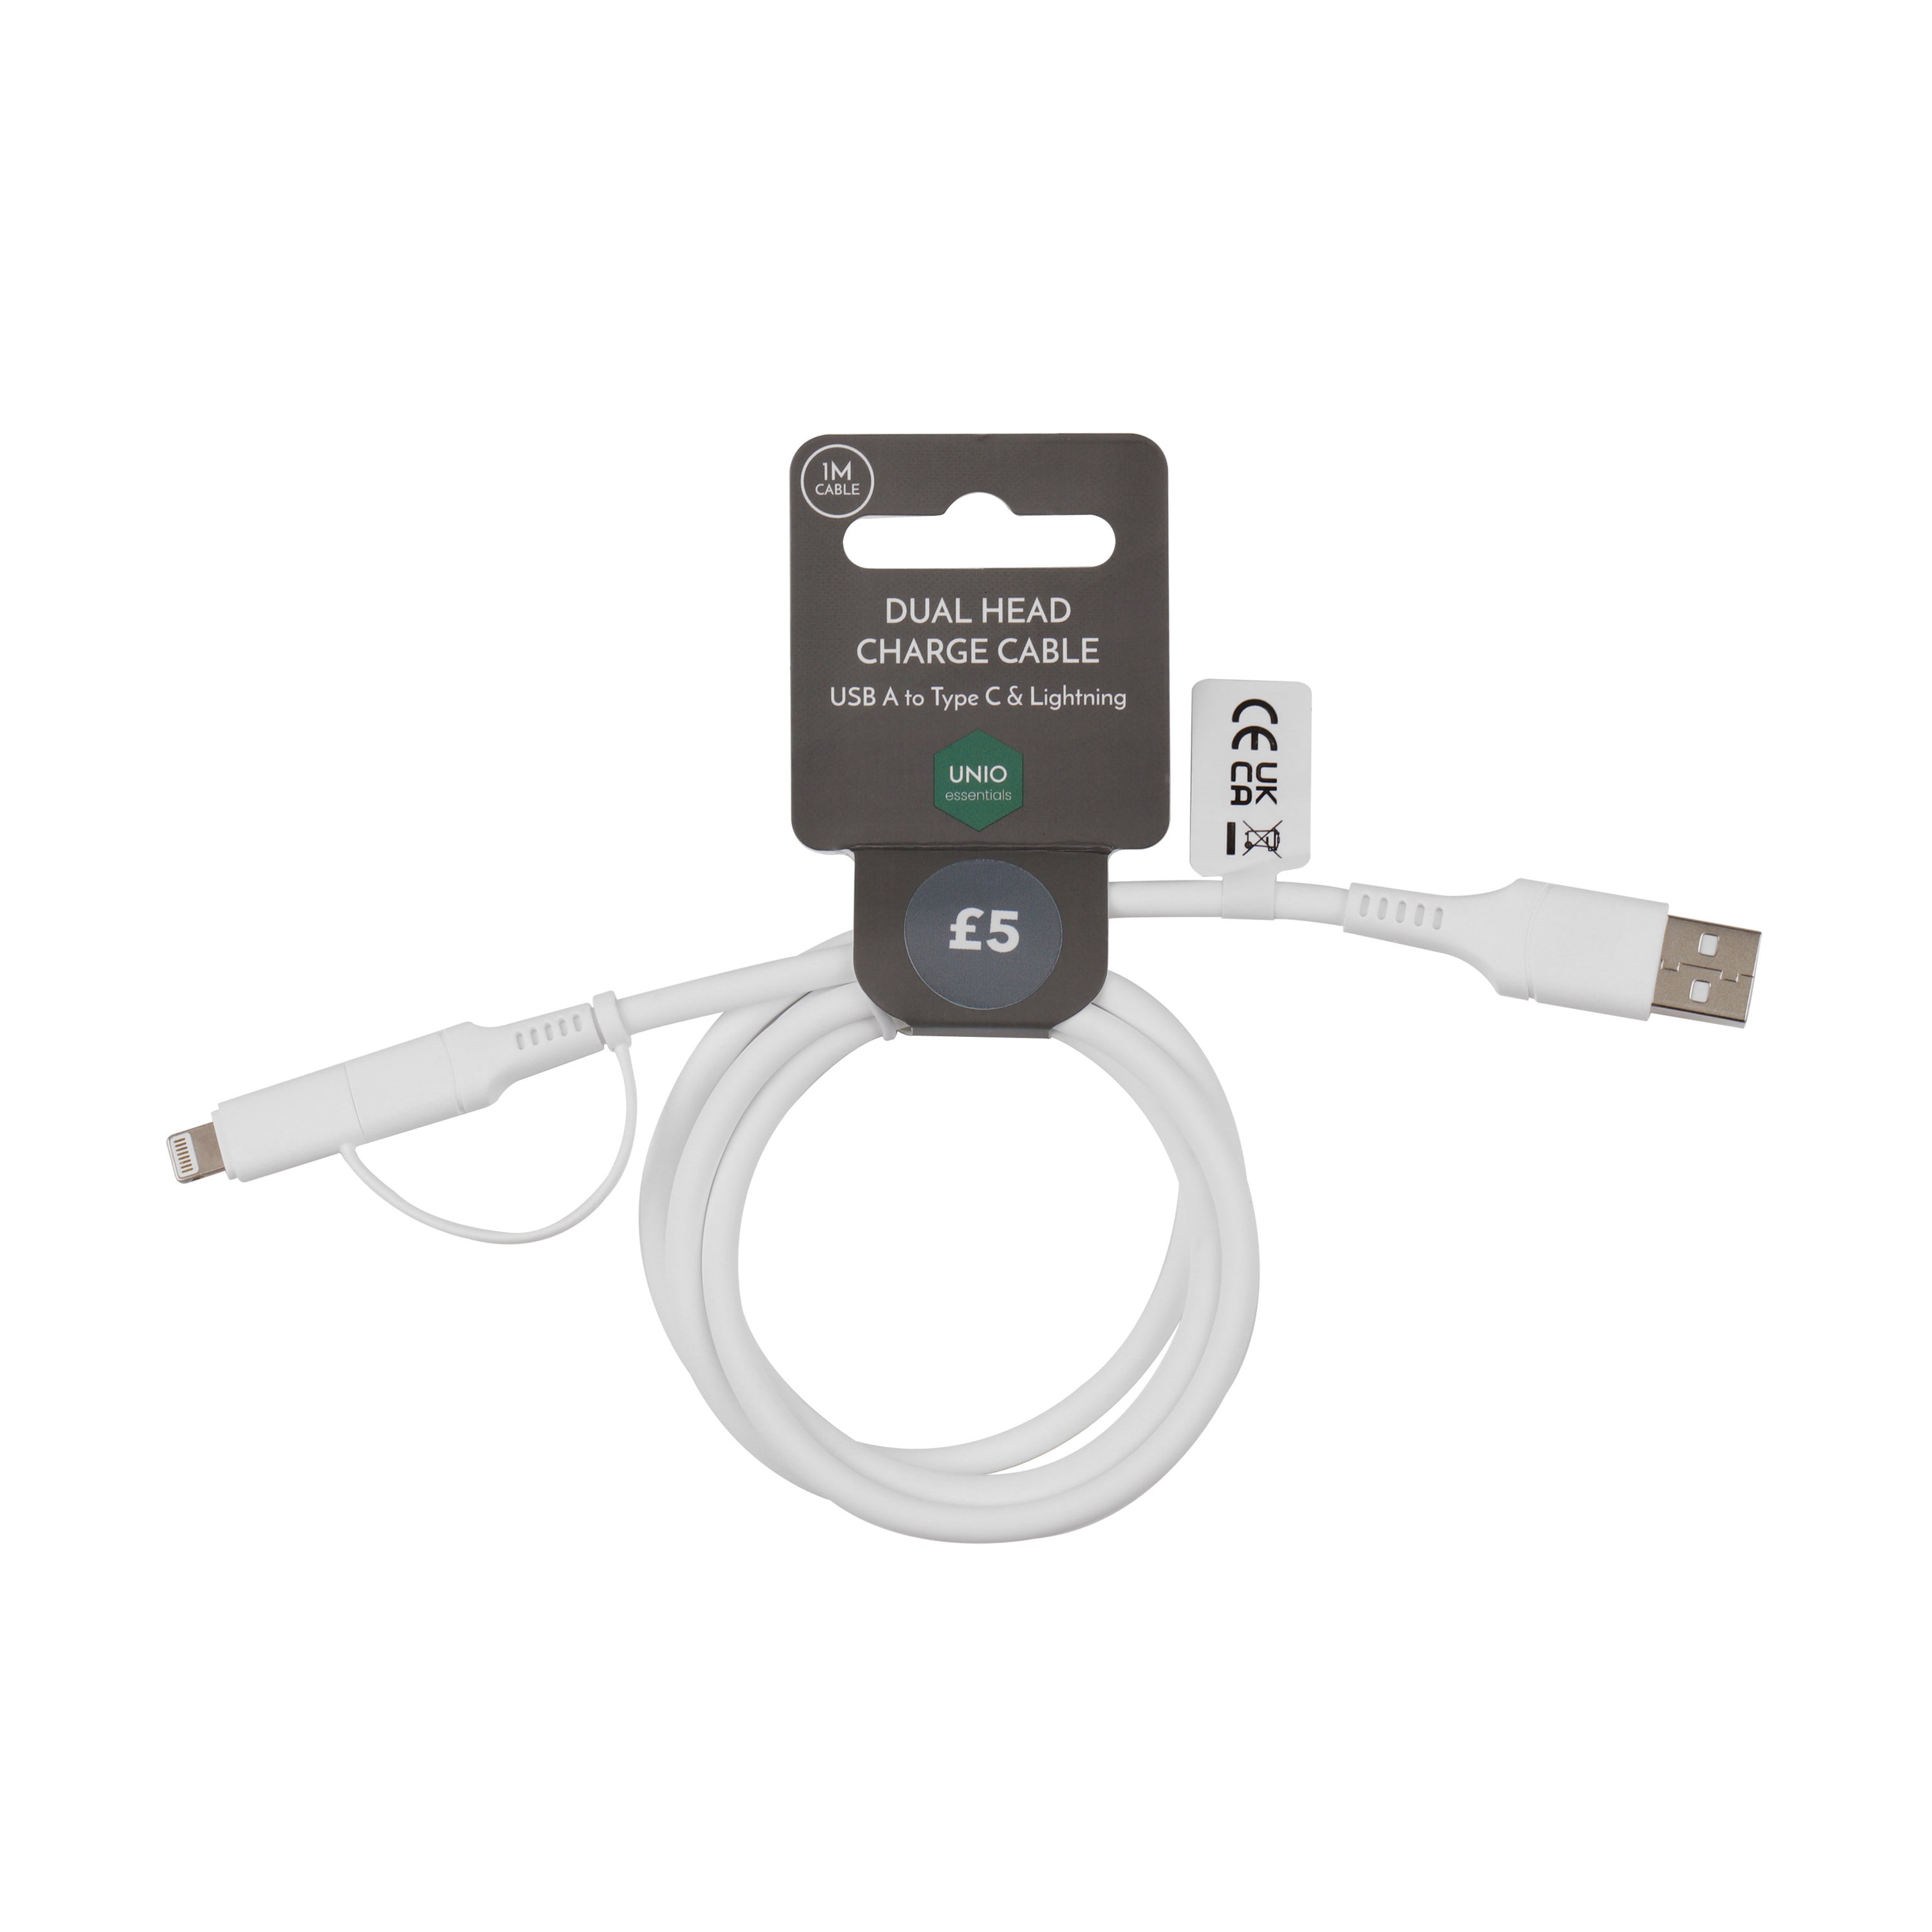 Dual Head Charge Cable